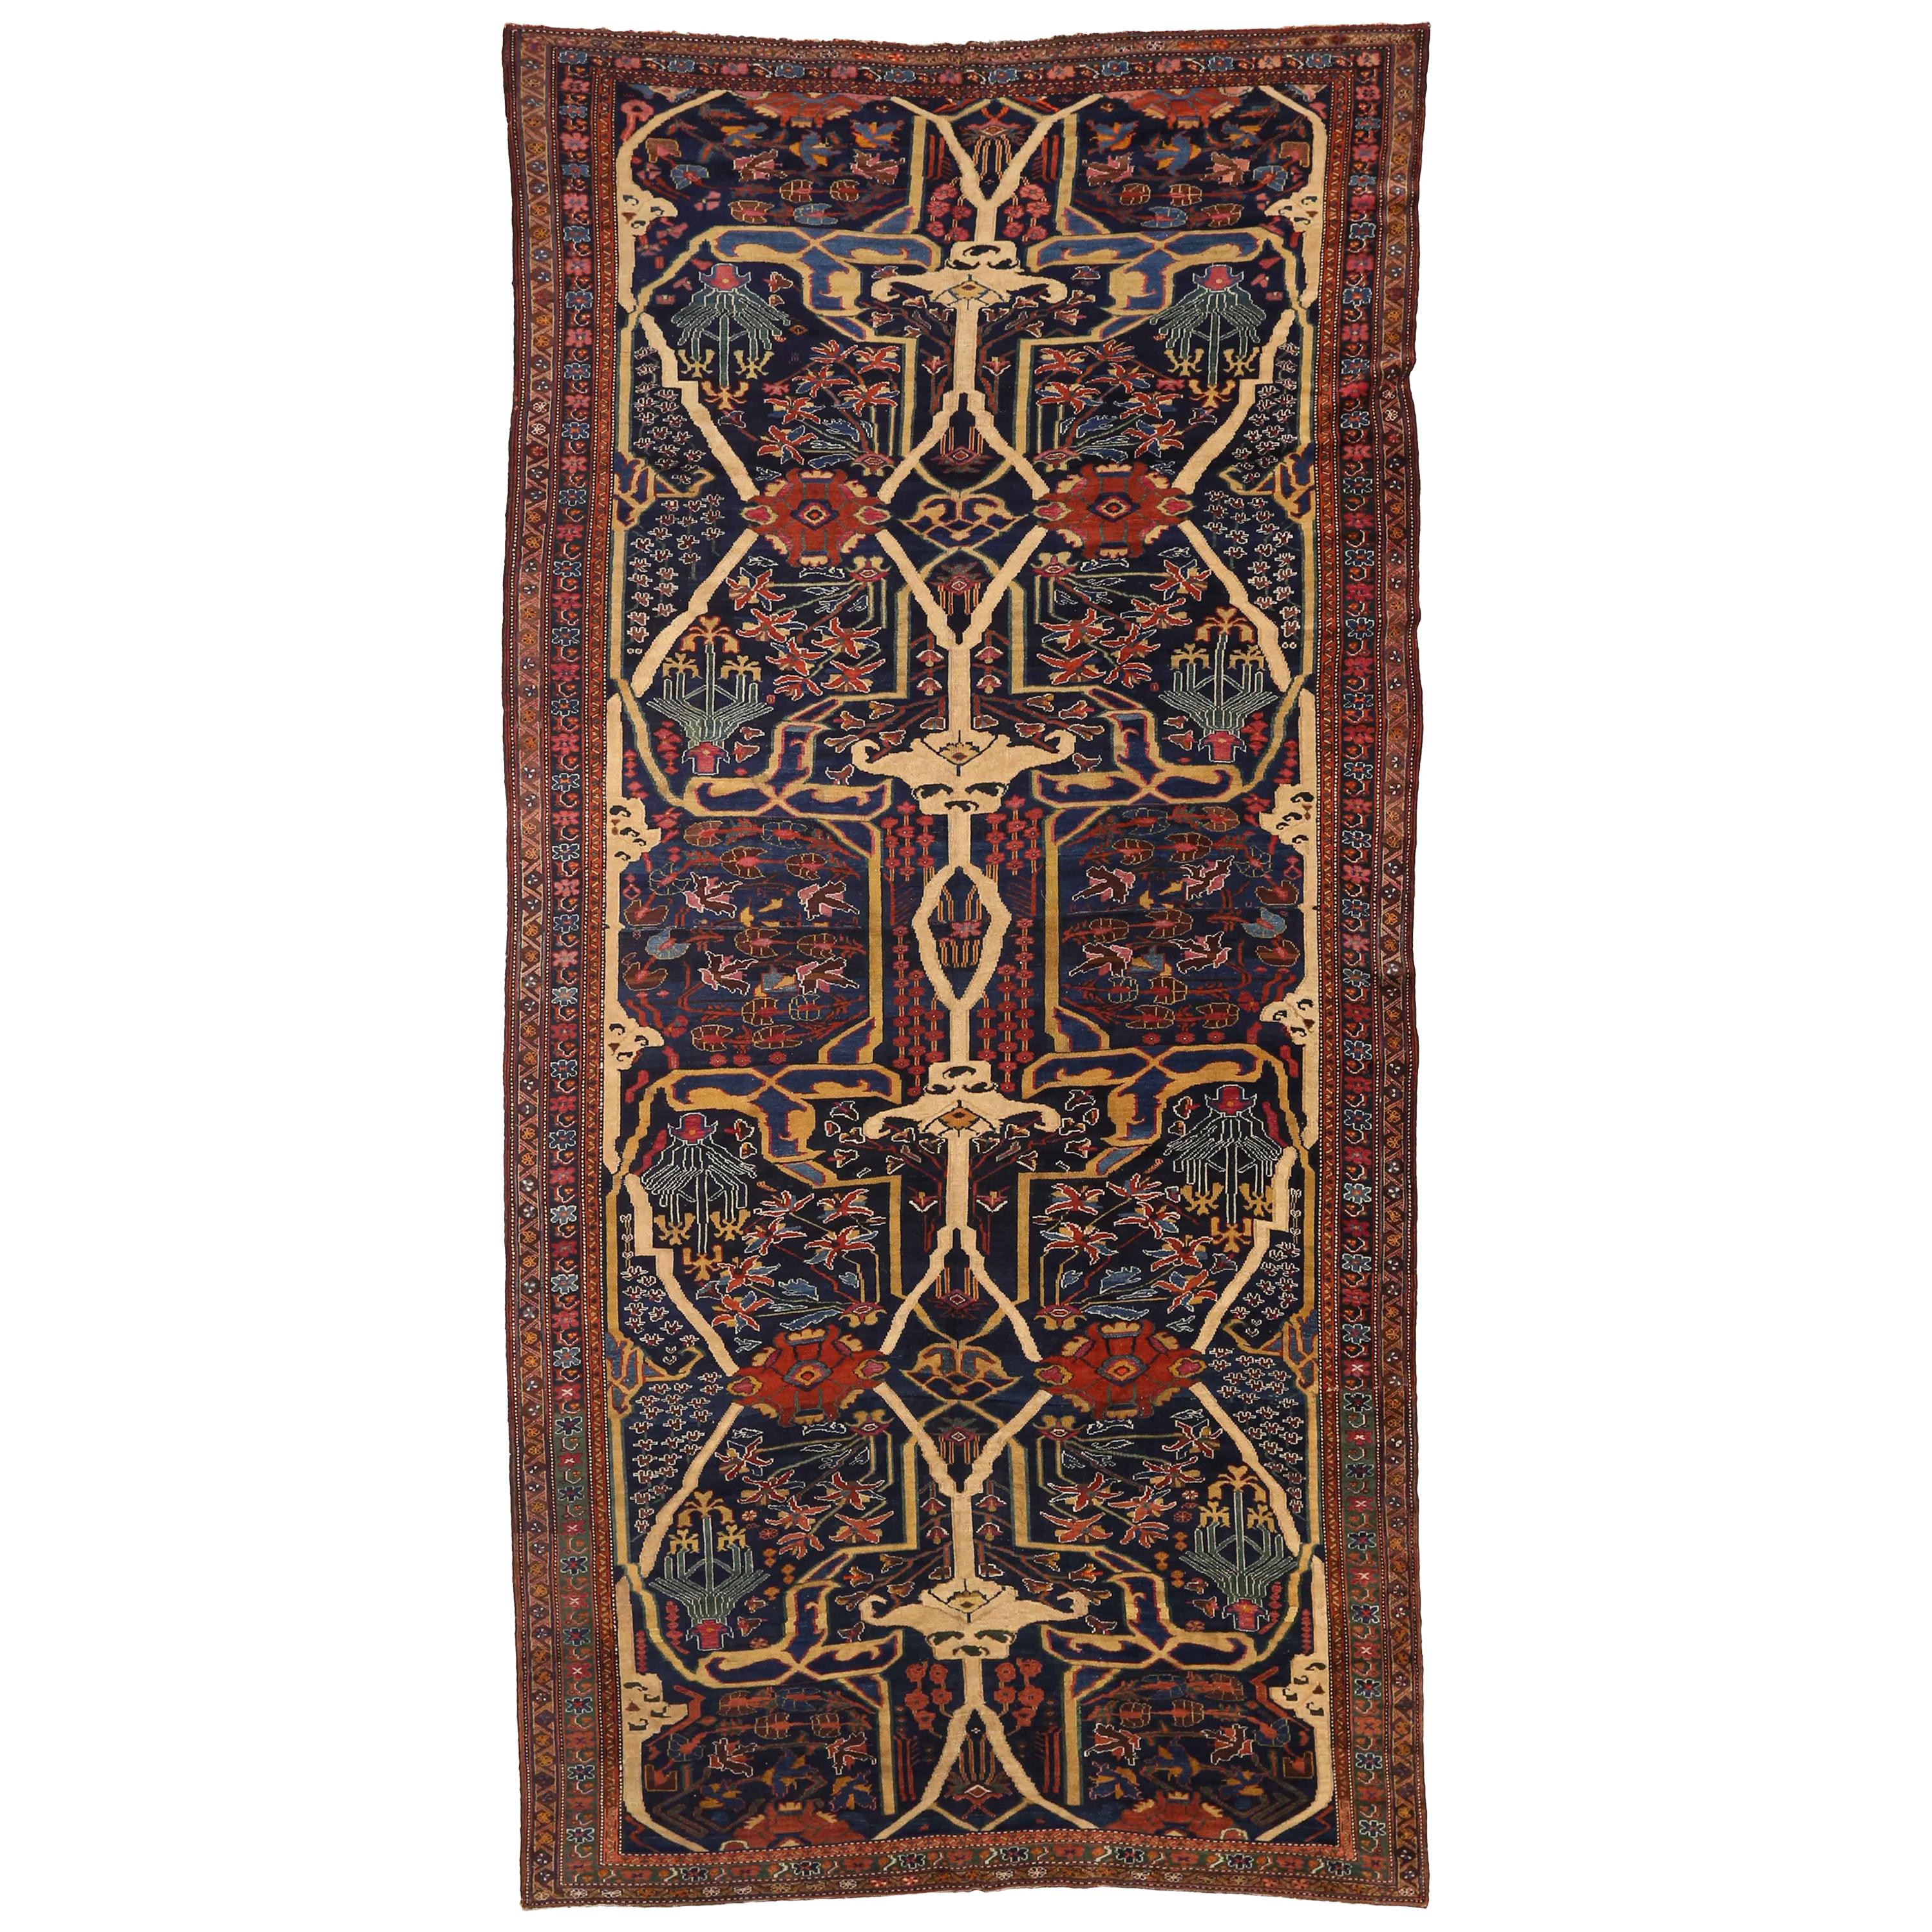 Antique Persian Rug Bijar Design with Multicolored Floral Patterns, circa 1920s For Sale